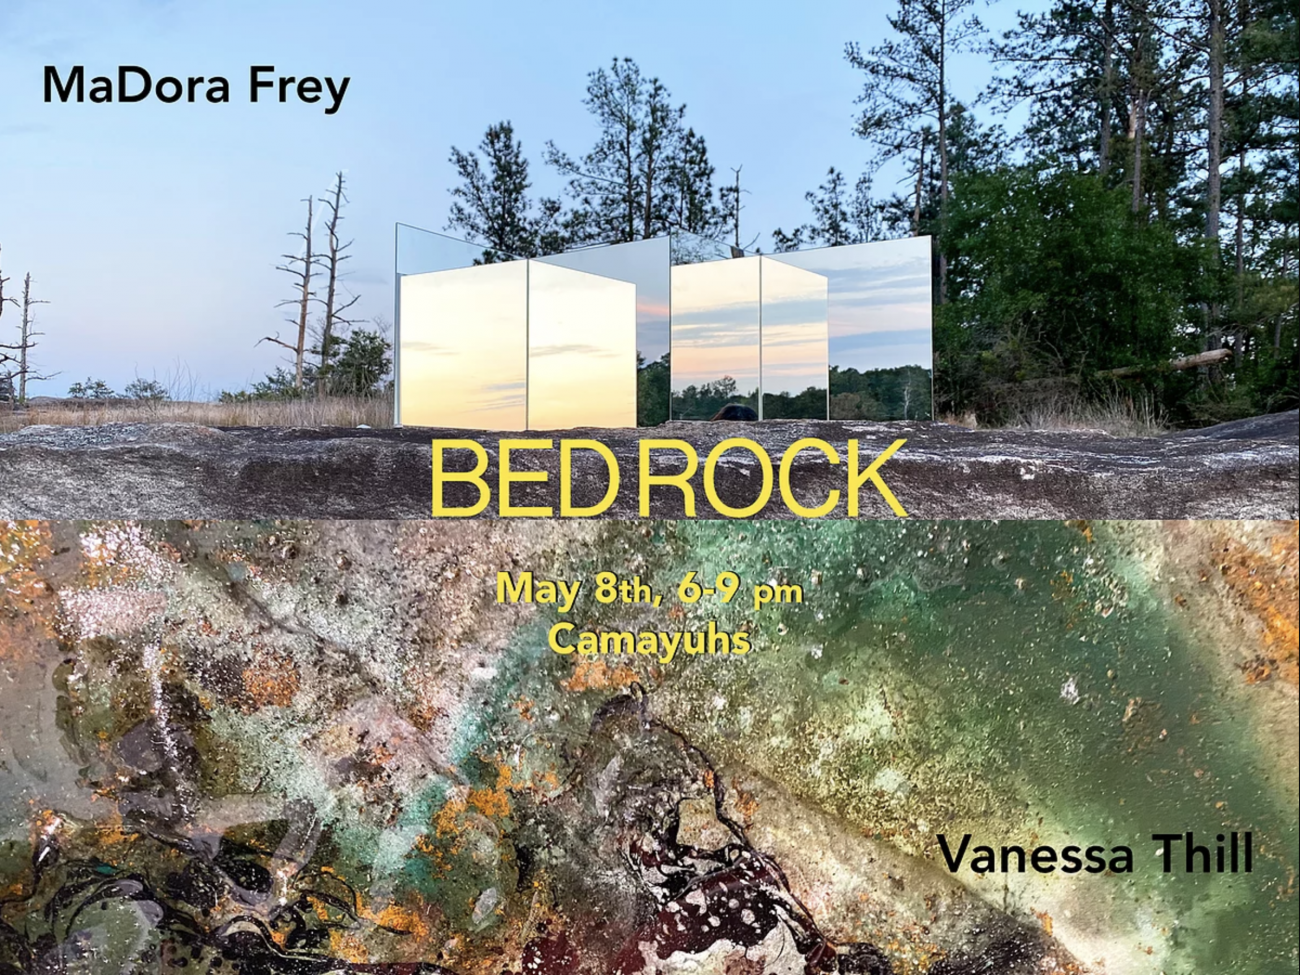 Mirrors reflecting the sunset collaged on top of an image of a colorful cross section of bed rock. The words Bed Rock in yellow in the center and the artist's names Vanessa Thill and MaDora Frey are in the bottom right and top left respectively.